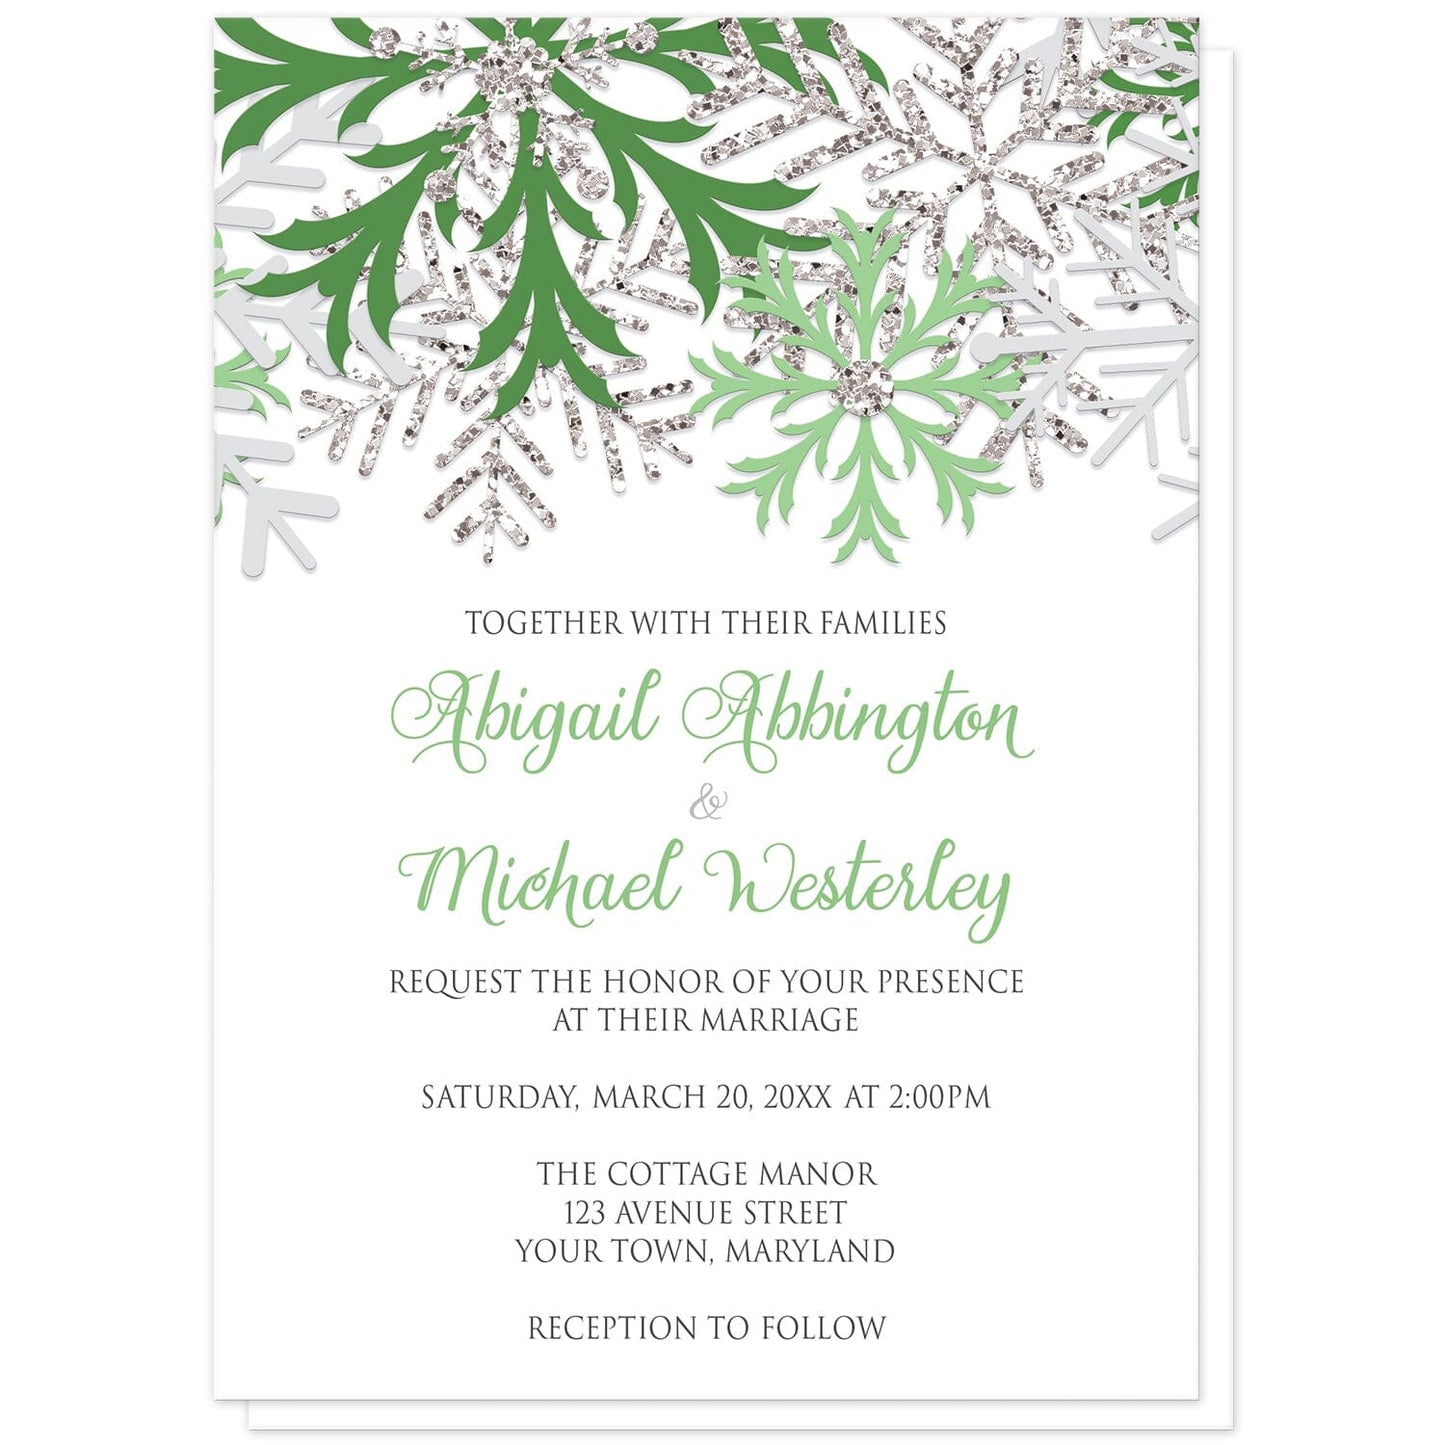 Winter Green Silver Snowflake Wedding Invitations at Artistically Invited. Beautiful winter green silver snowflake wedding invitations designed with green, light green, silver-colored glitter-illustrated, and light gray snowflakes along the top over a white background. Your personalized marriage celebration details are custom printed in green and gray below the pretty snowflakes.